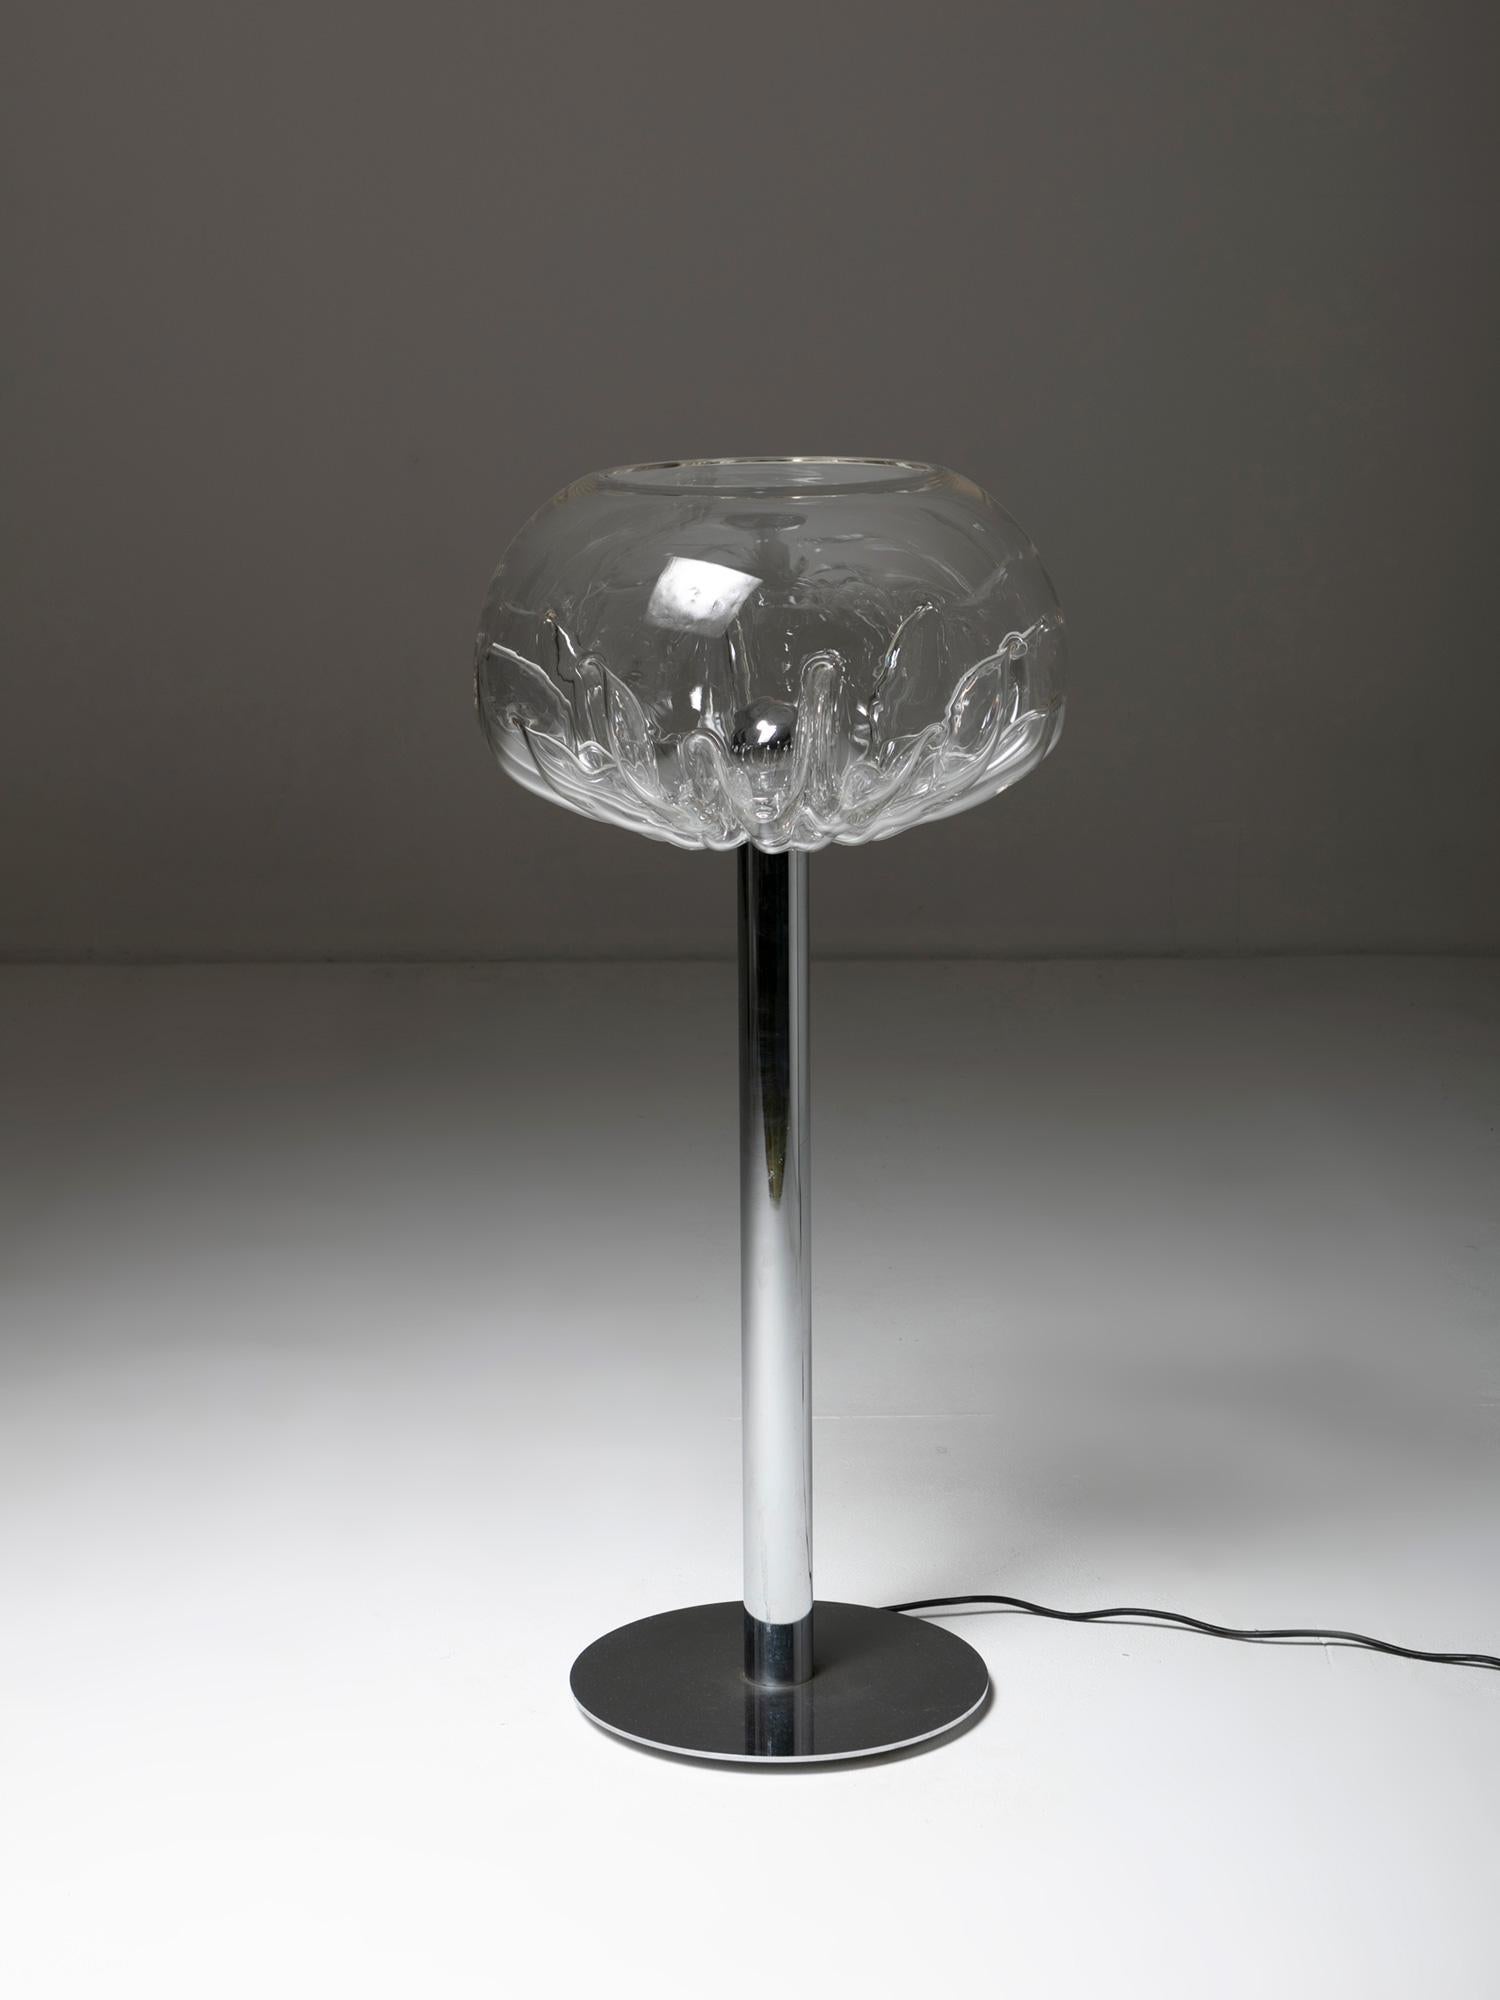 Rare floor lamp by Toni Zuccheri for VeArt.
Chrome stem support a large Murano glass molded diffuser.